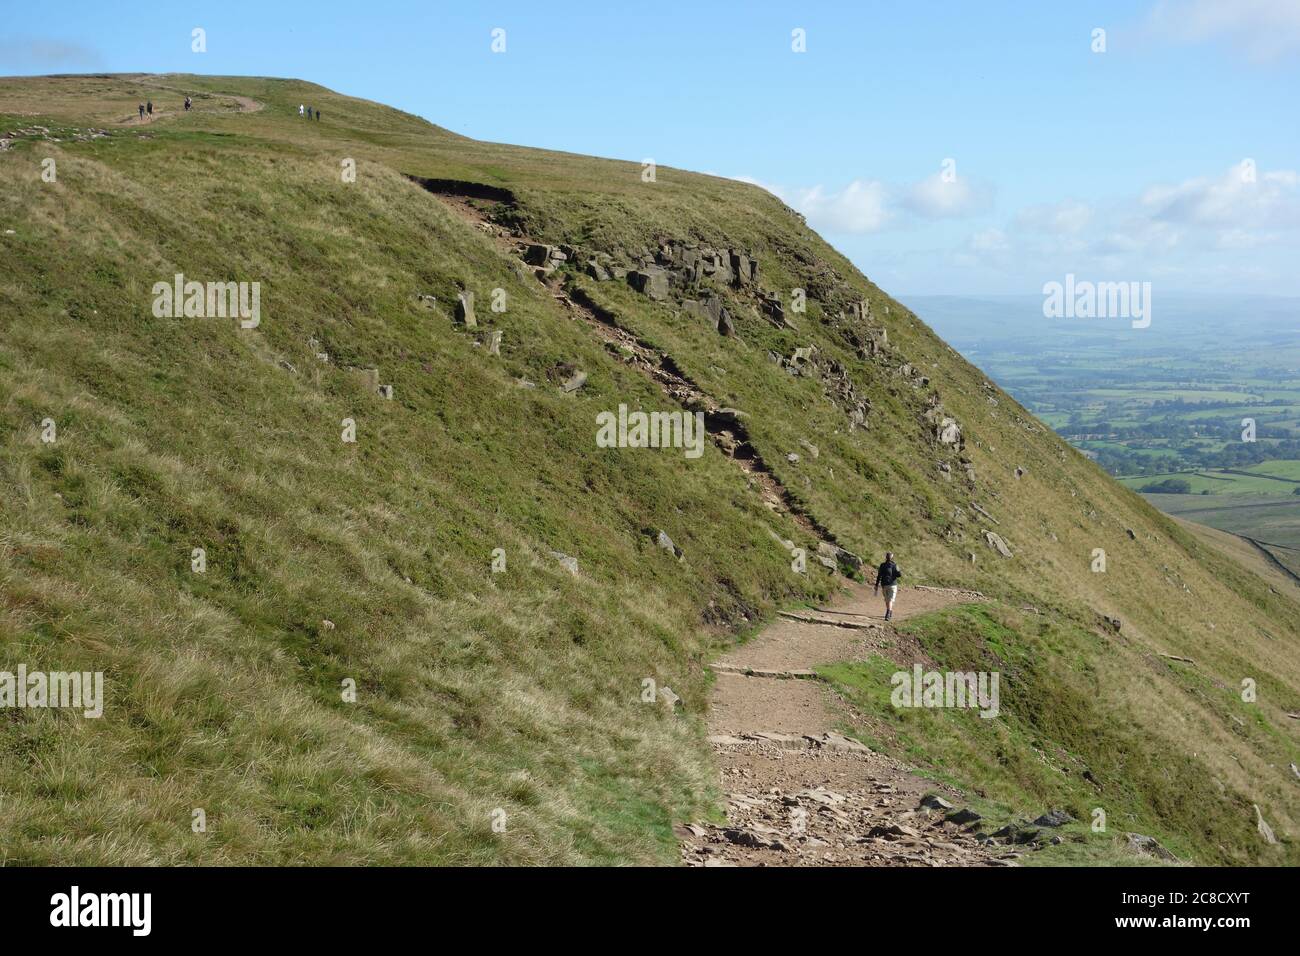 Hiker Walking down the Old Cart Track from the Summit of Pendle Hill on the Pendle Way Footpath from Barley, Lancashire, UK. Stock Photo